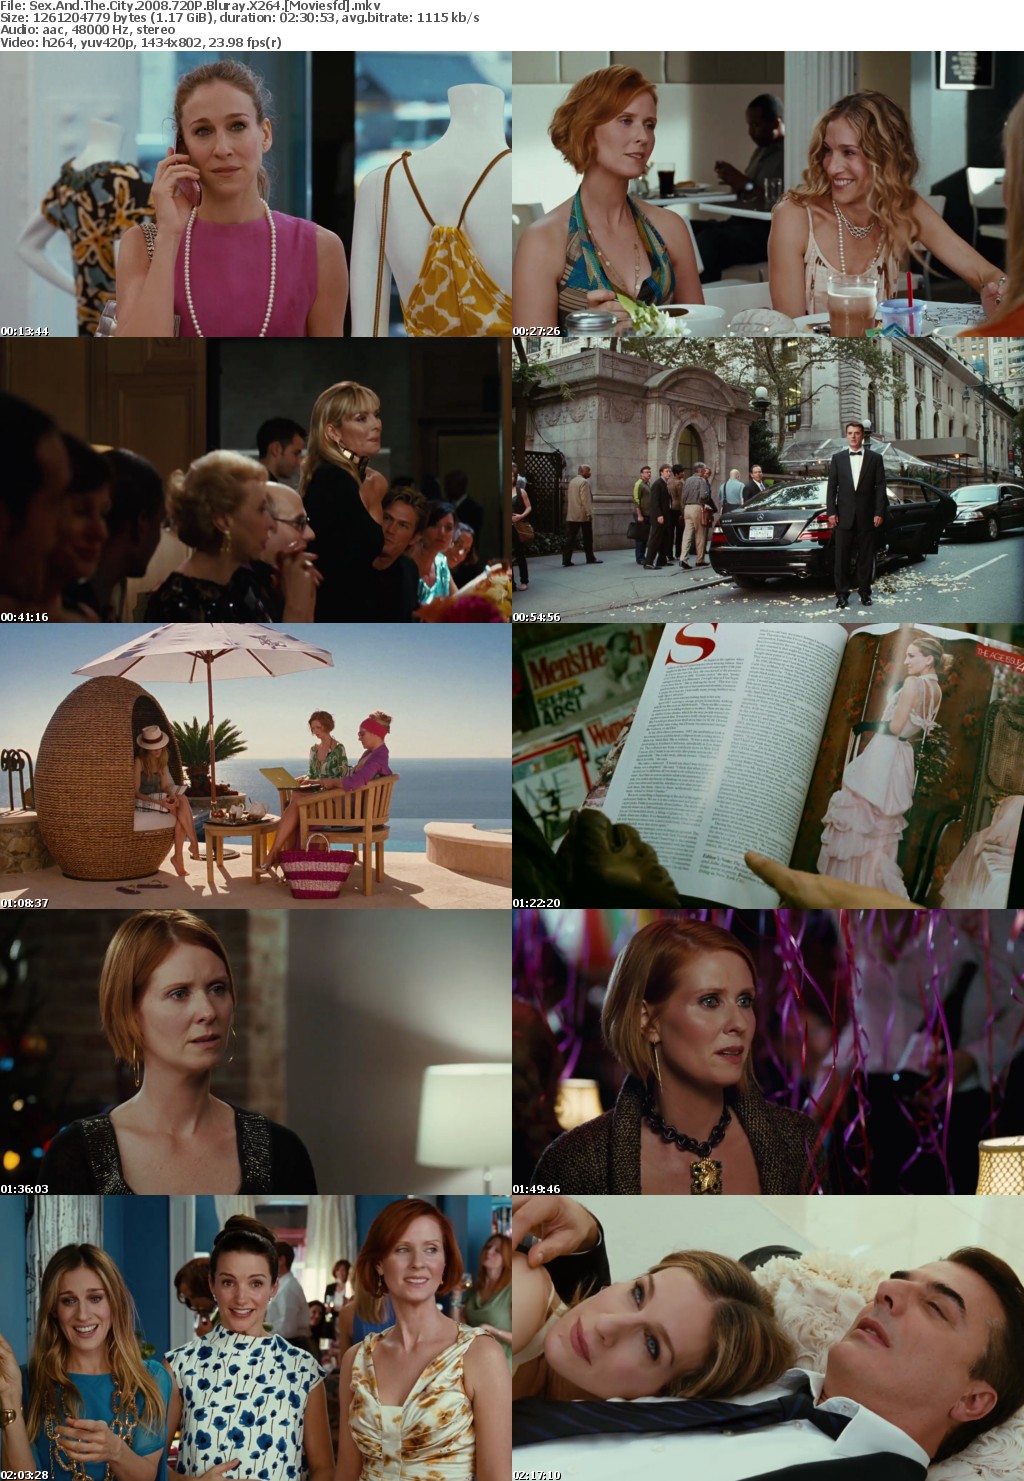 Sex And The City (2008) 720p BluRay x264 - MoviesFD